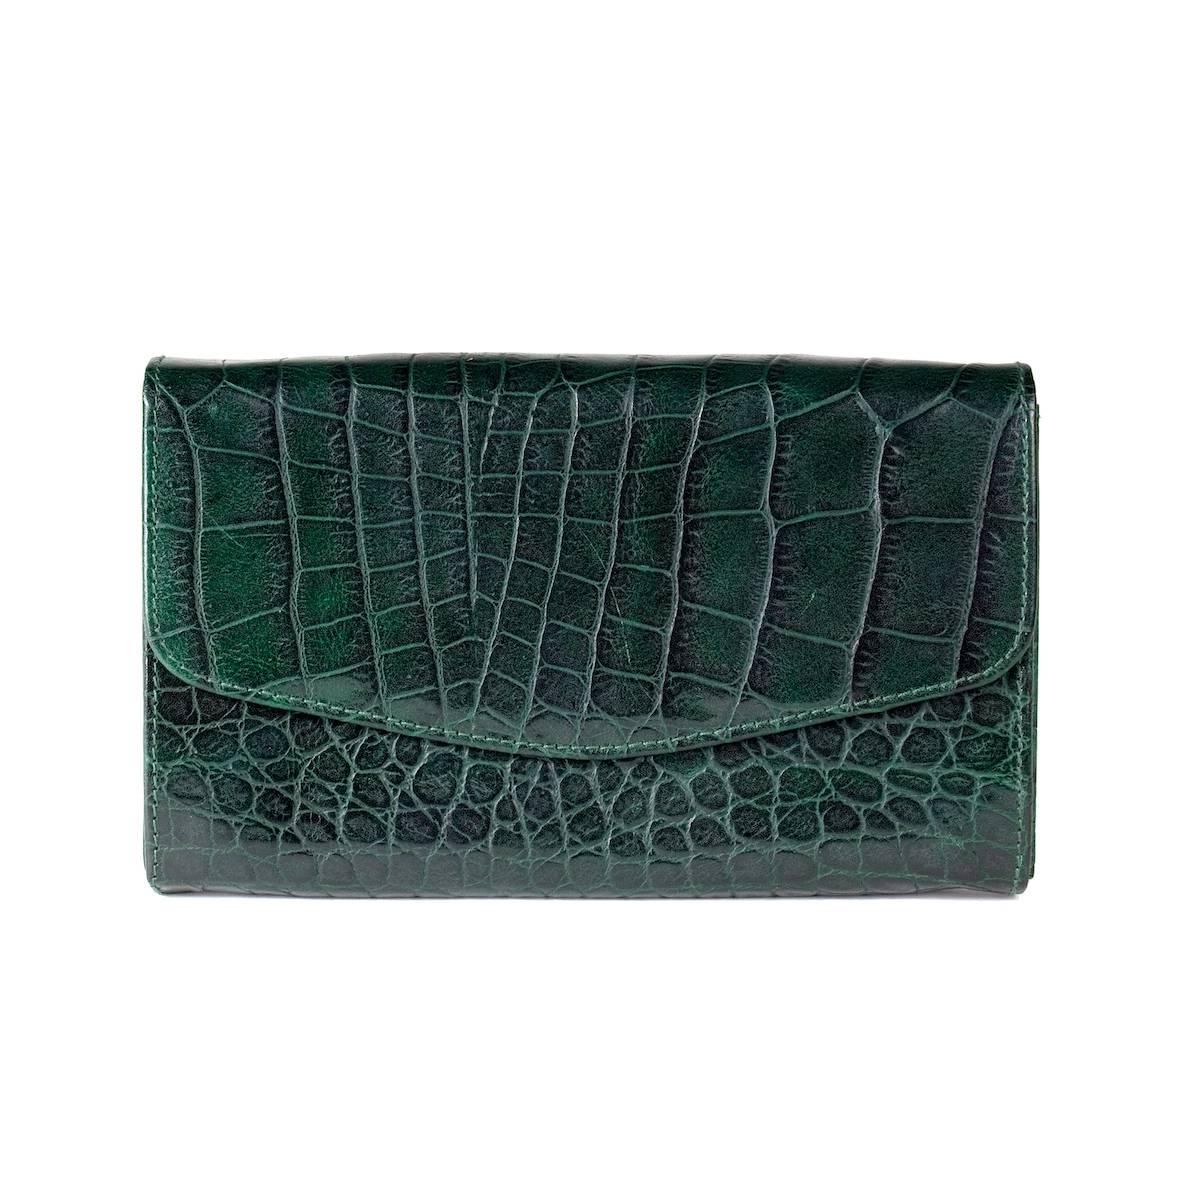 This is a wallet from Sonya Rykiel.  It features a dark green faux croc embossed print.  Flap closures with snap.  

Wallet dimensions:  7.5" x 1.25" x 5"
